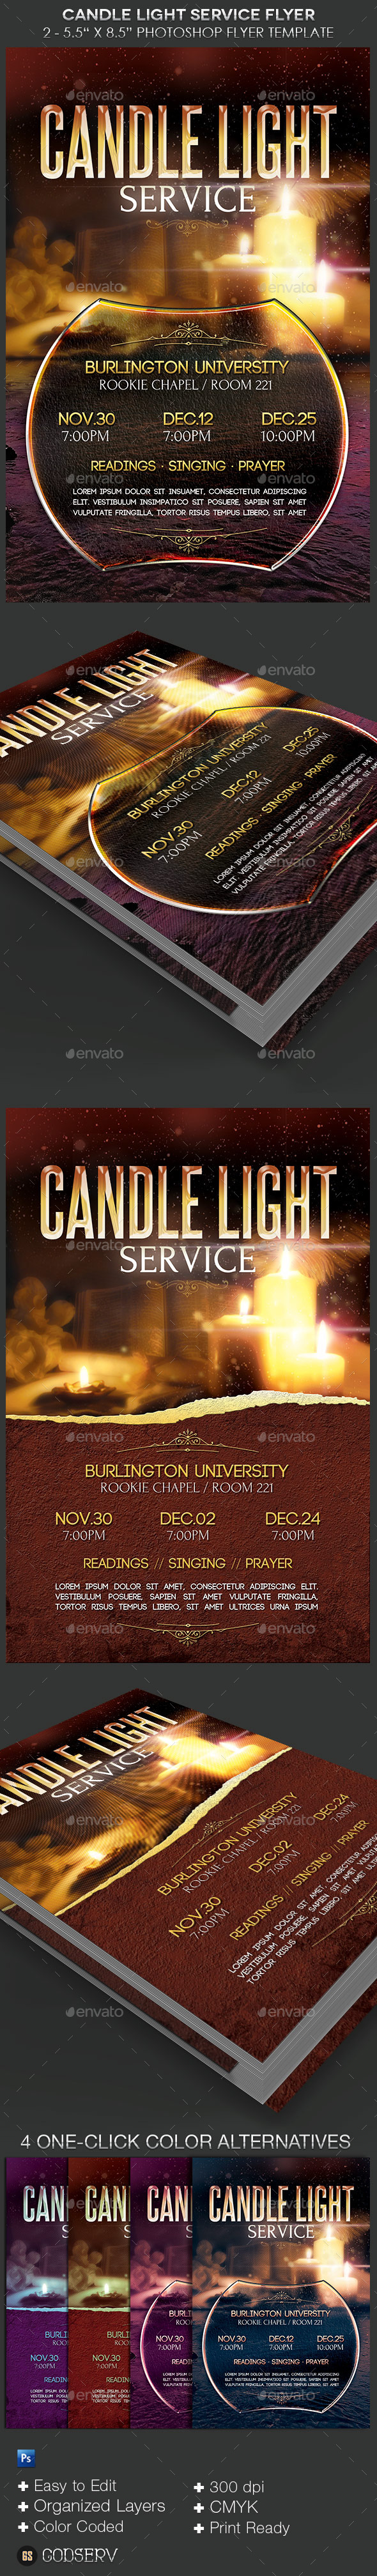 Candle Light Service  Flyer Templates